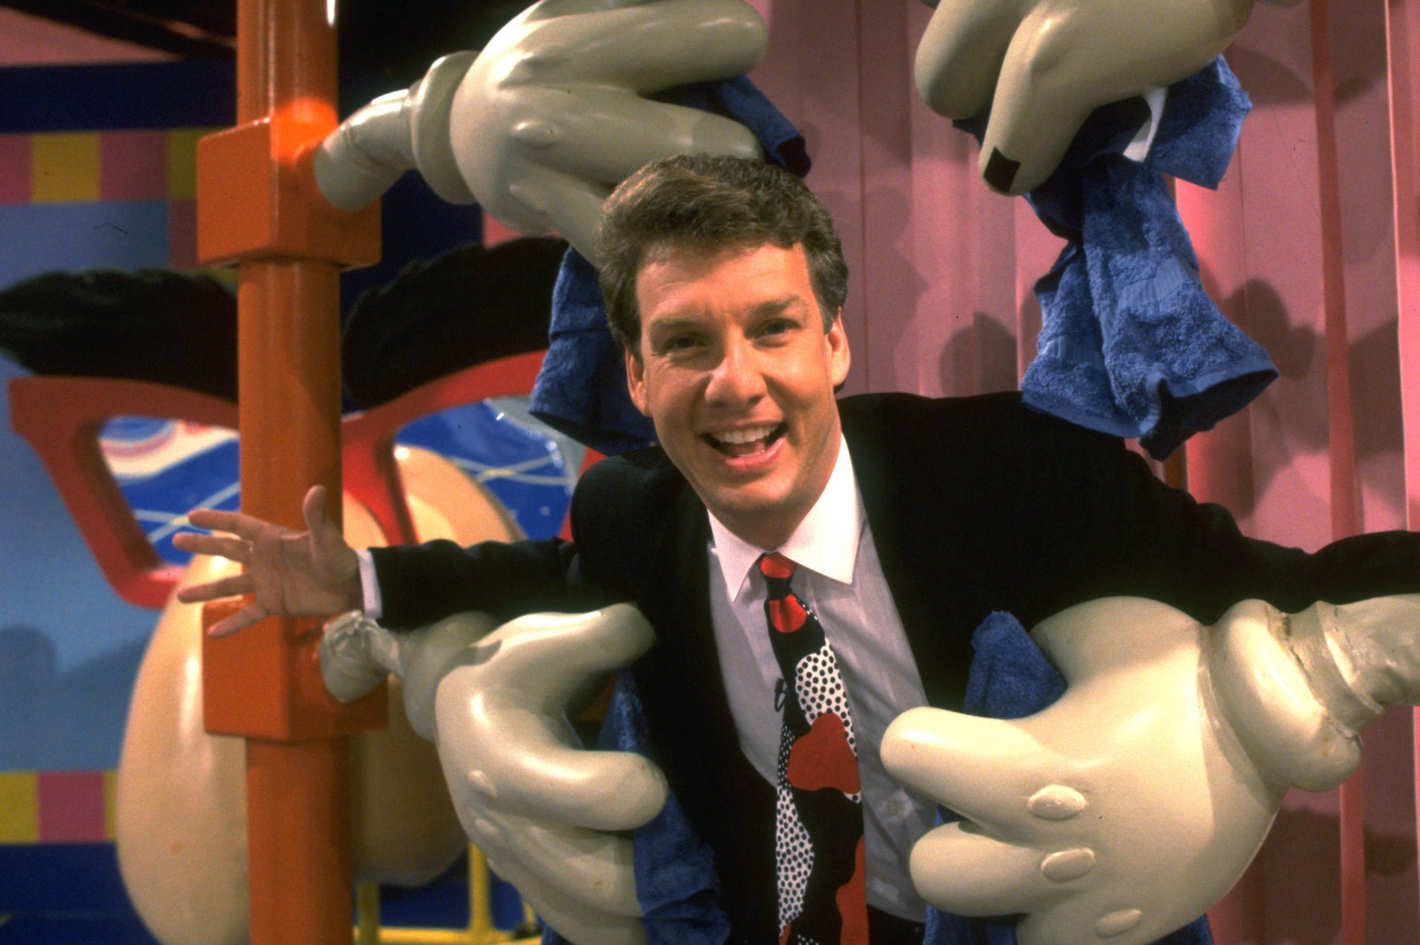 Double Dare host Marc Summers